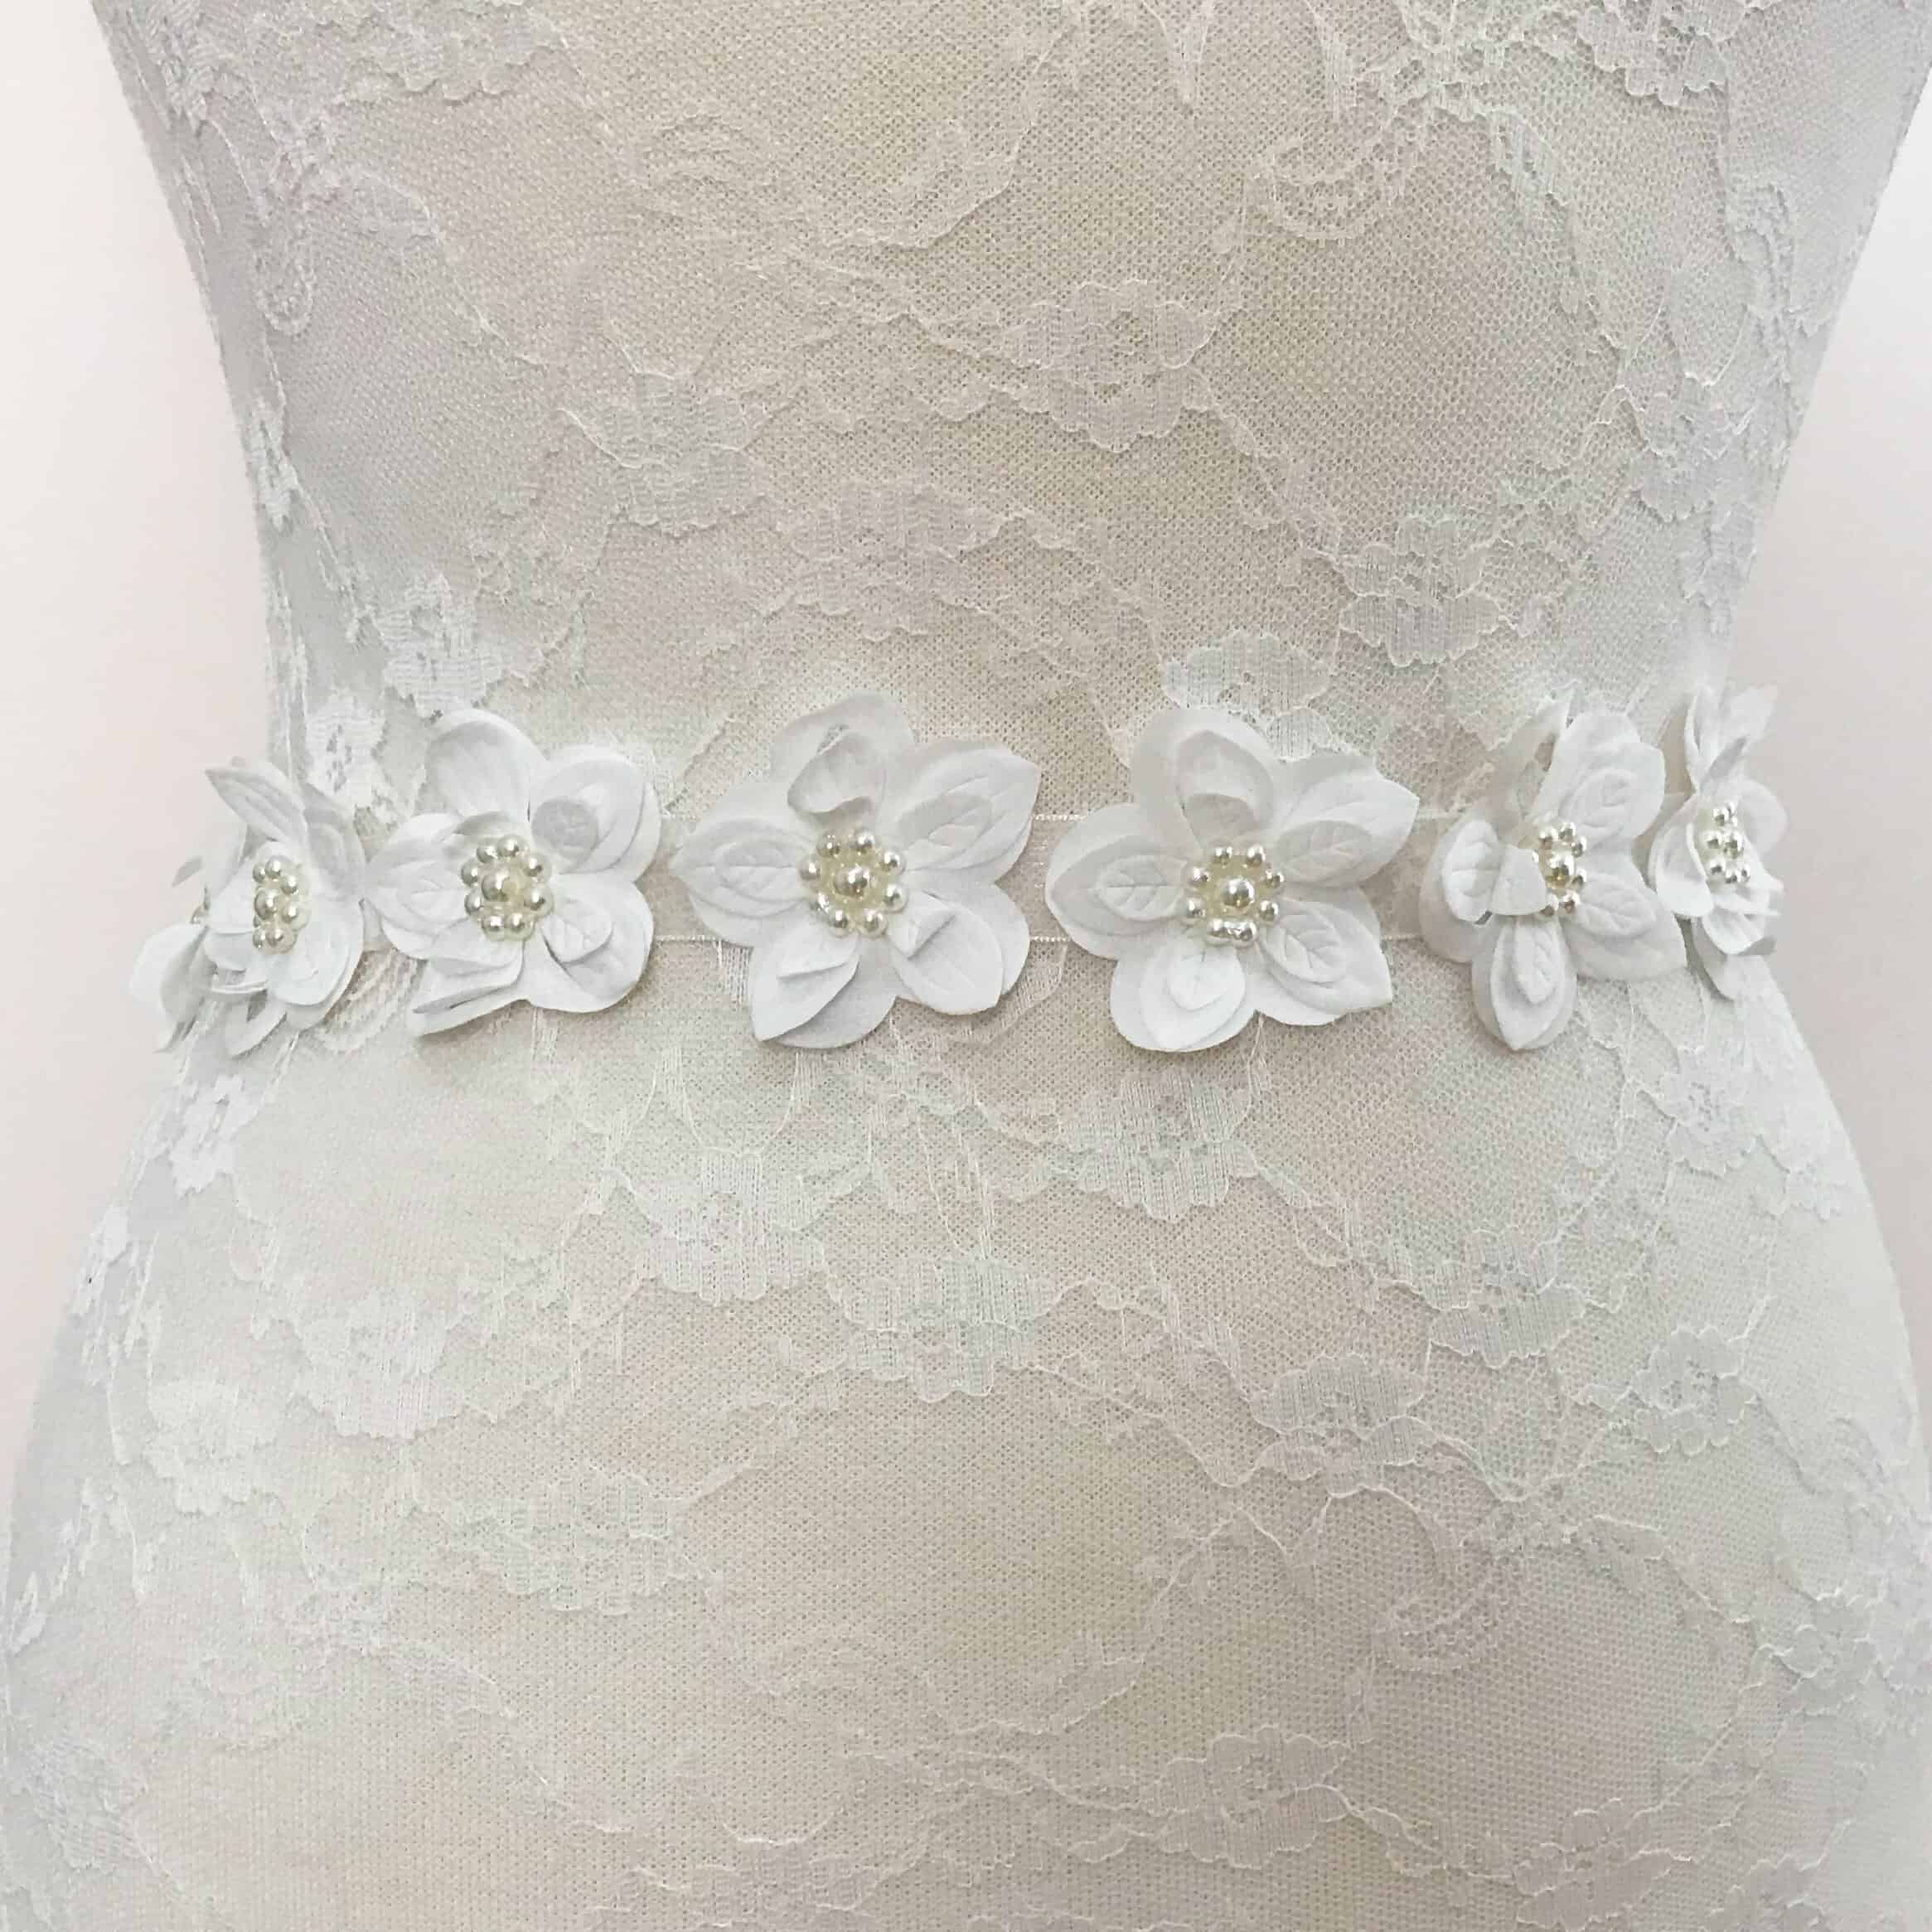 White Satin Cut-Out Fabric Flower Trim with Pearls - Shine Trim